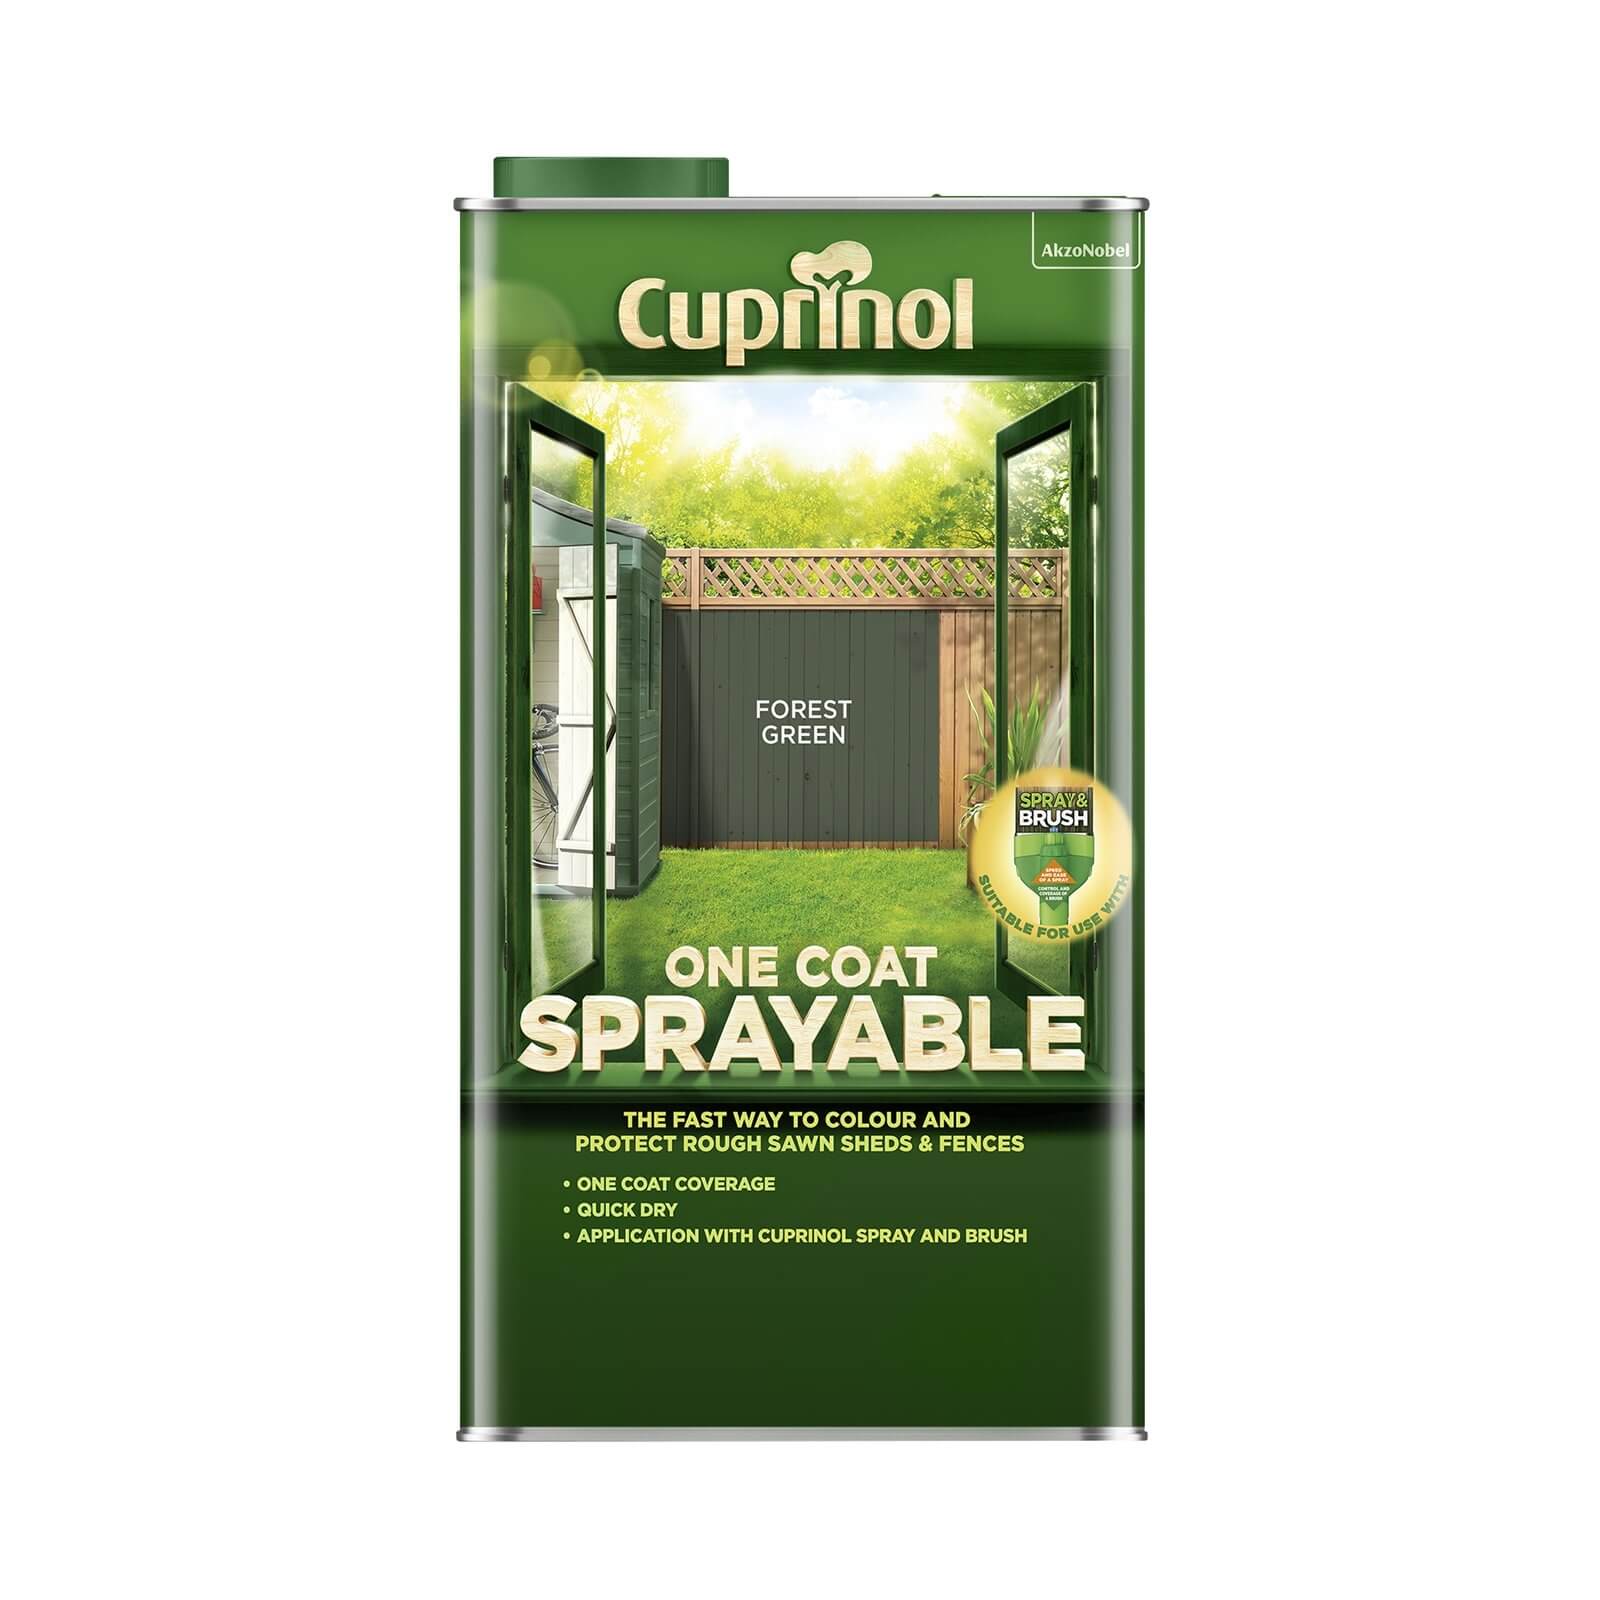 Cuprinol One Coat Sprayable Shed & Fence Paint Paint Forest Green - 5L